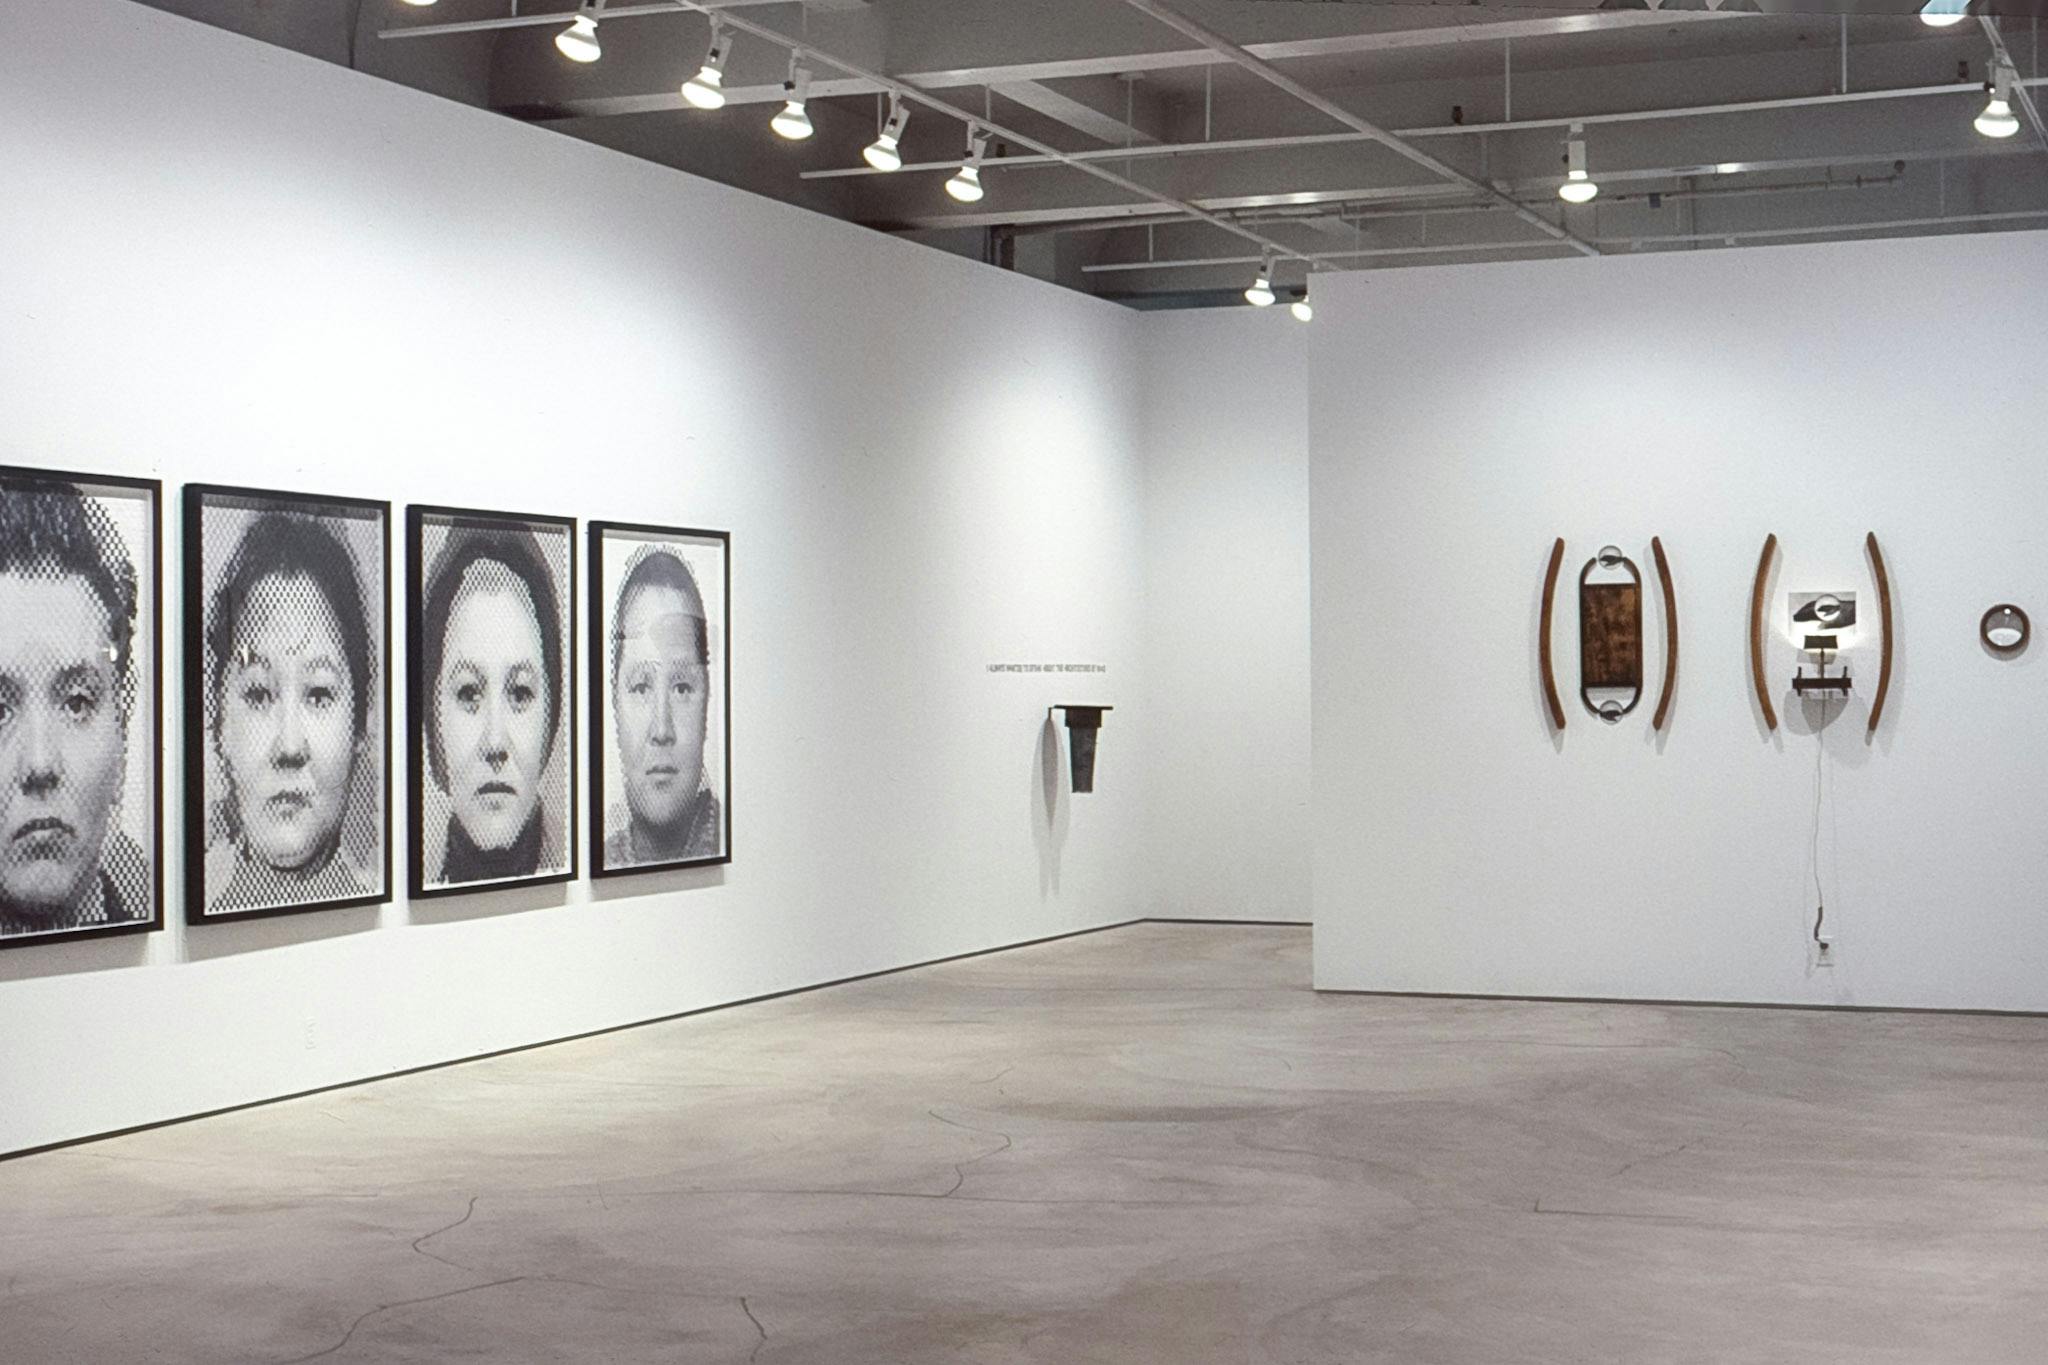 An installation view of the gallery. Various artworks including black and white large-scale photographs of people’s faces and found objects are mounted on the walls.